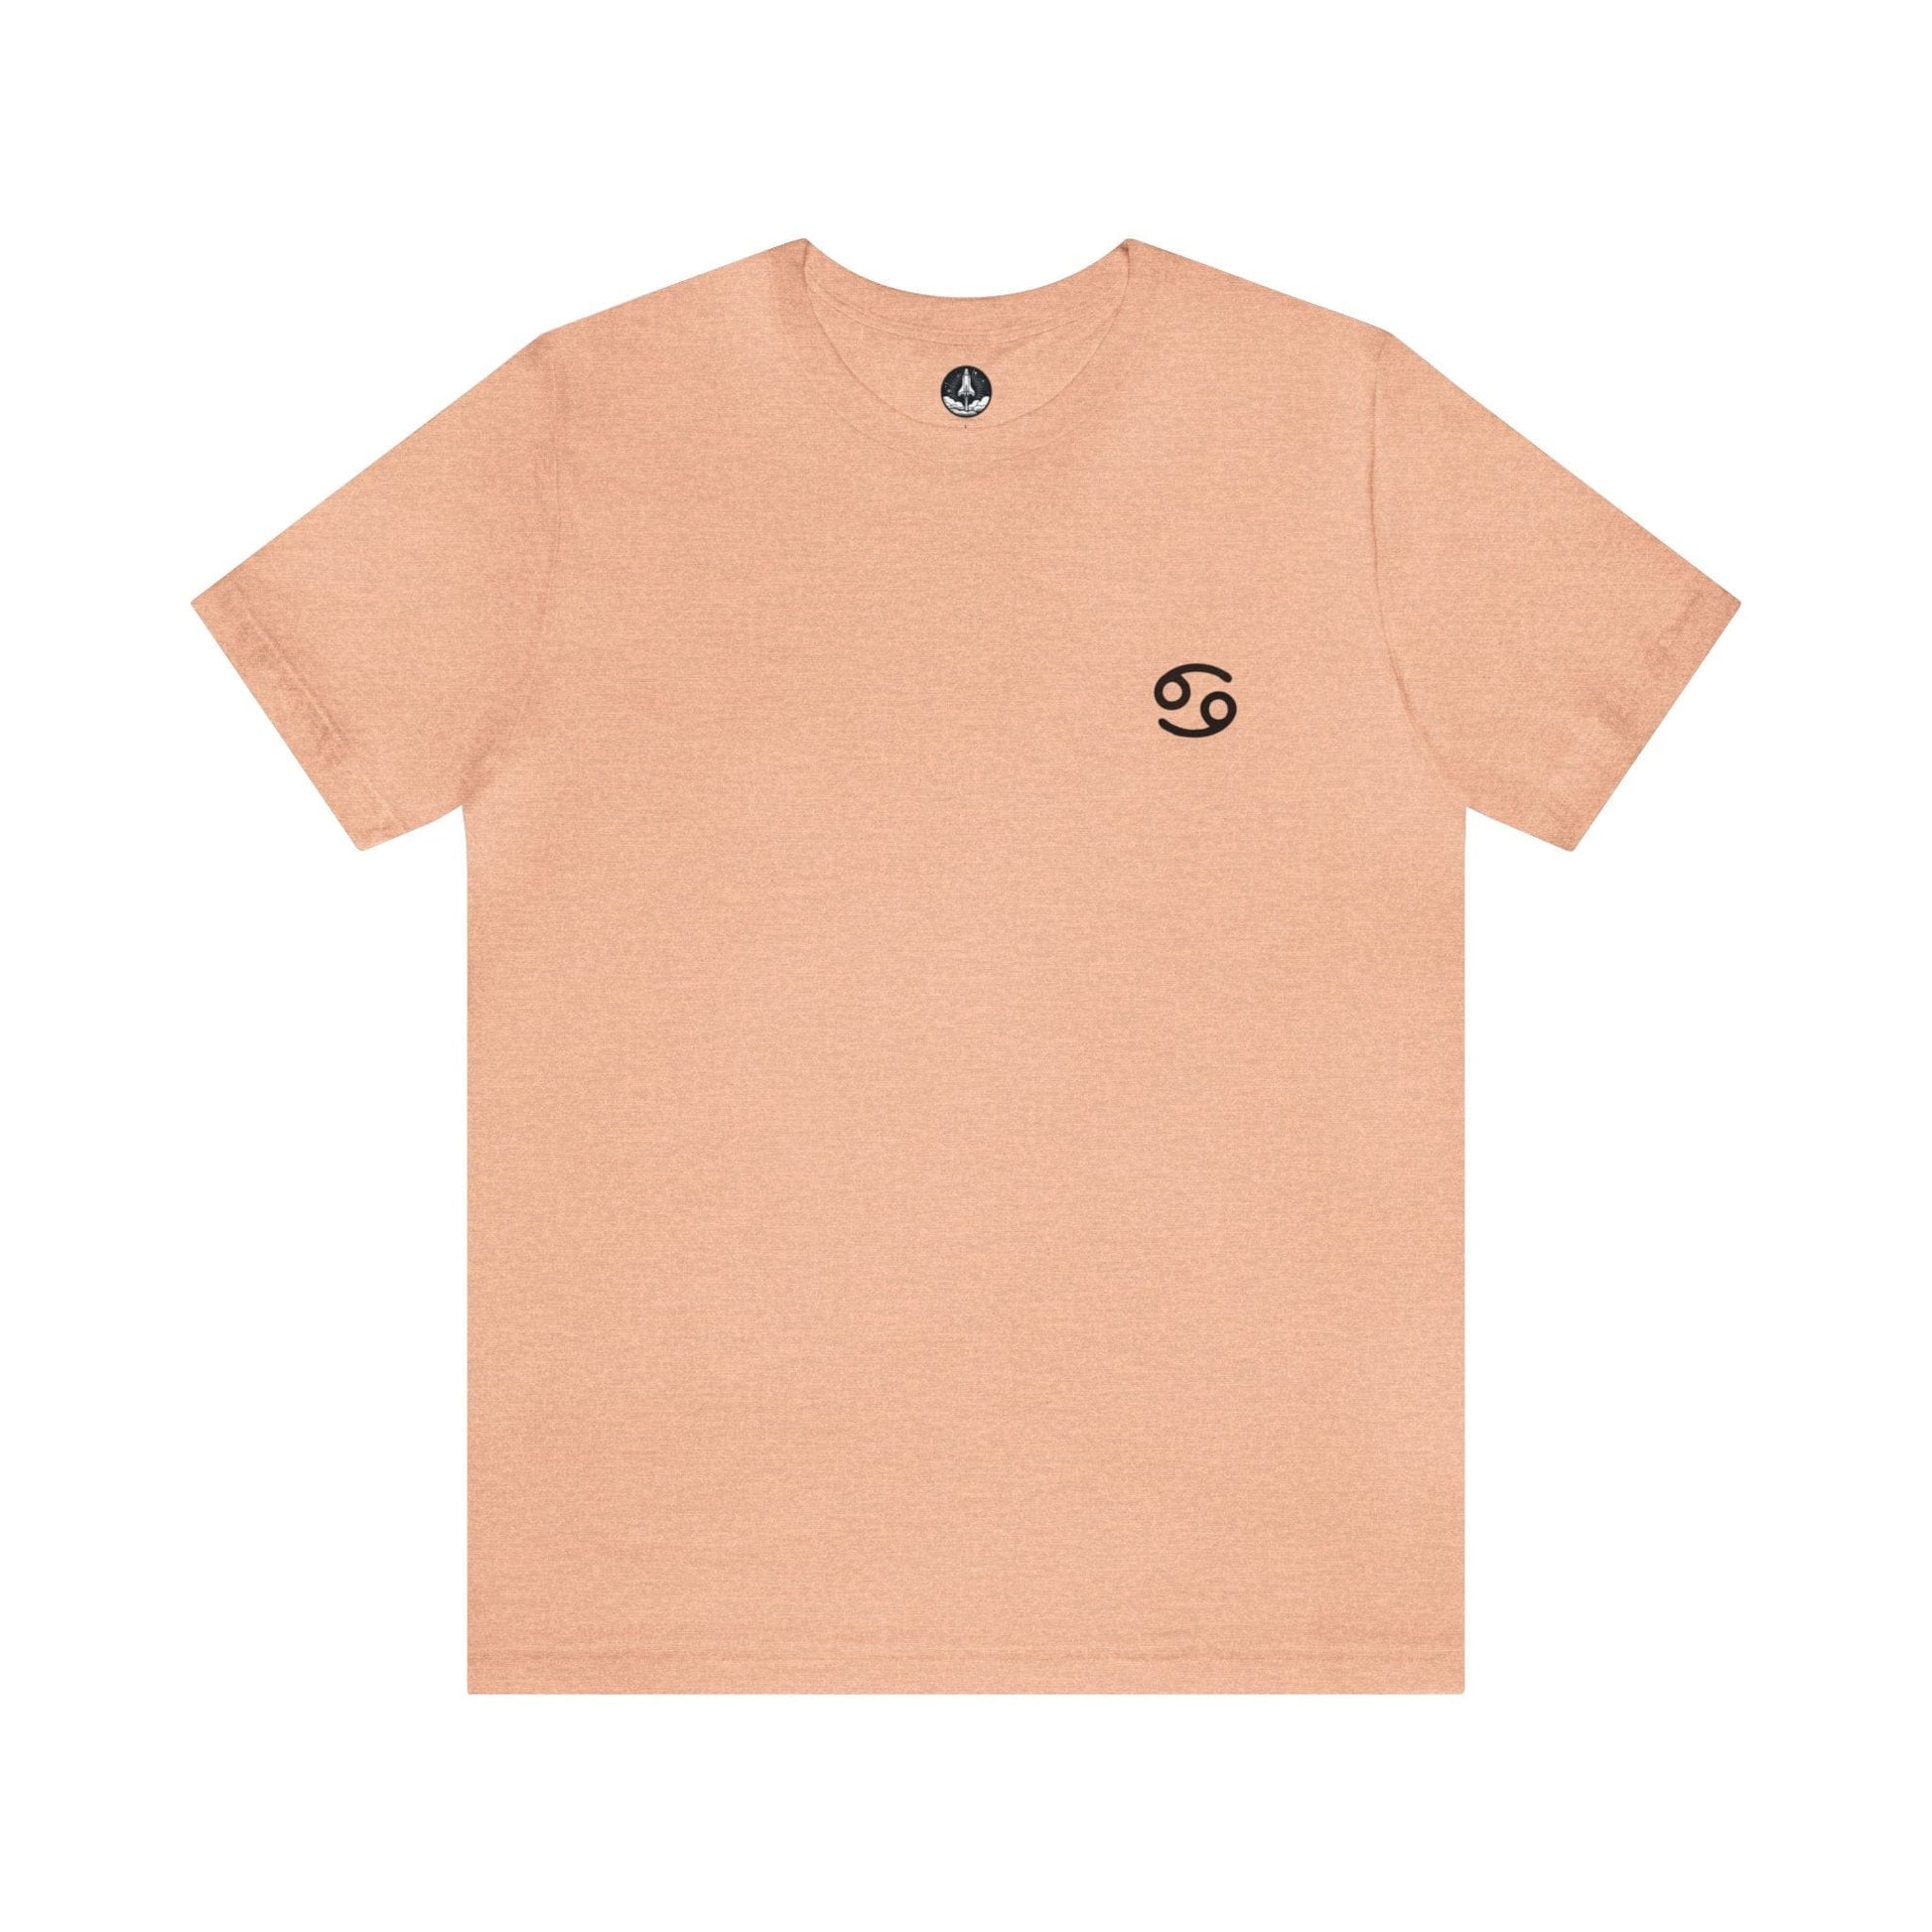 T-Shirt Heather Peach / S Cancer Zodiac Crest T-Shirt: Comfort and Intuition for the Moonchild